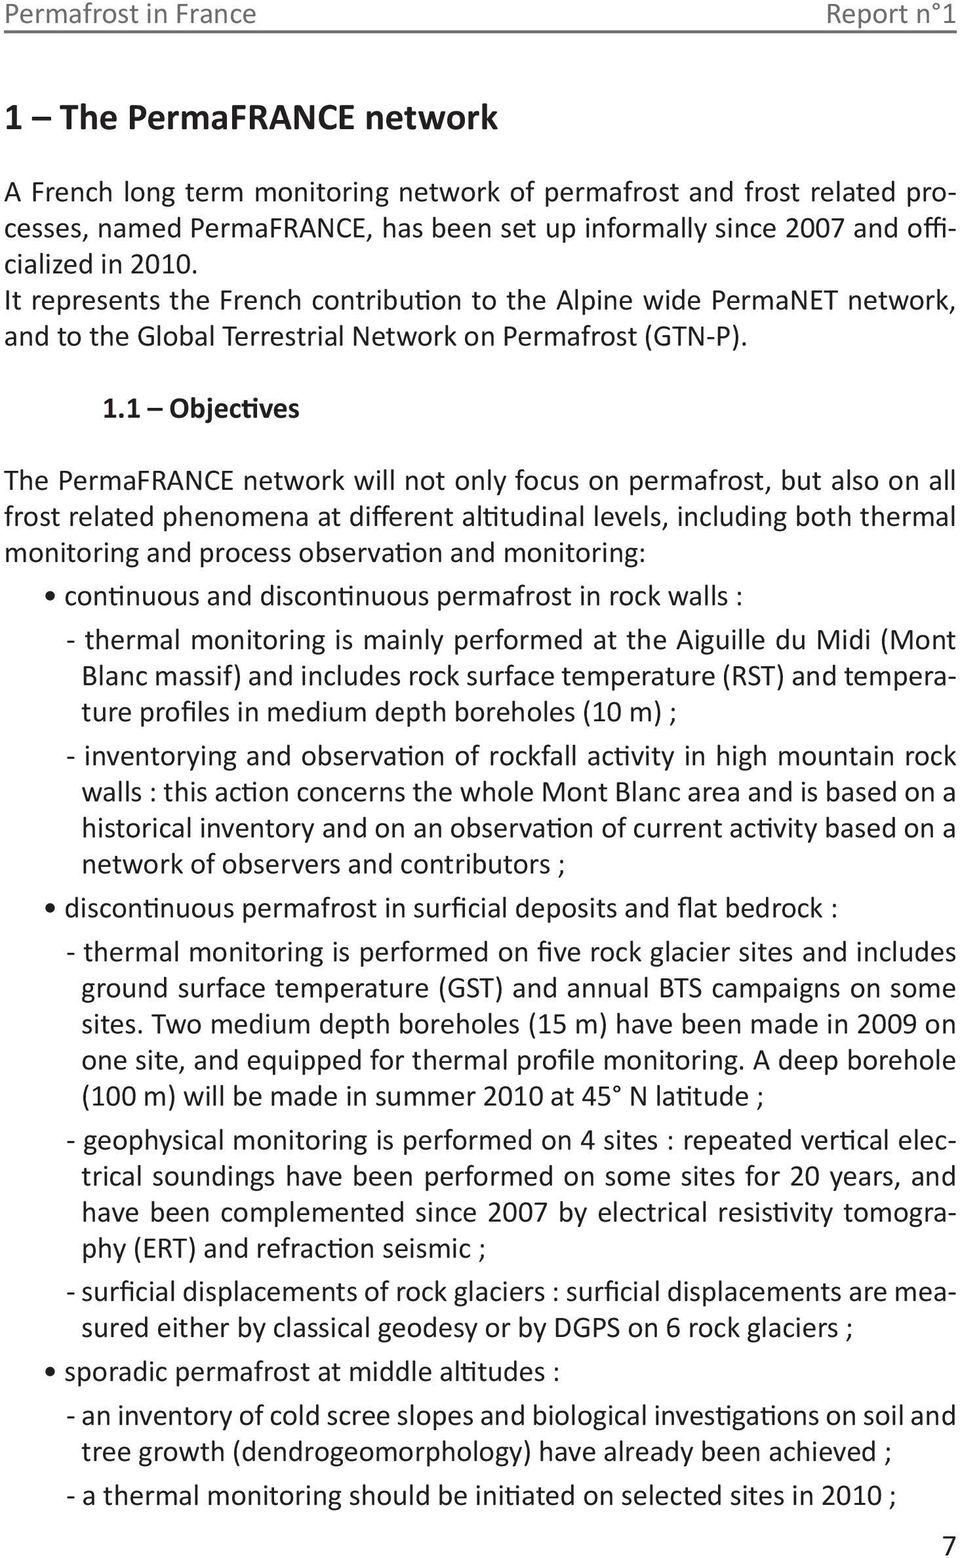 1 Objectives The PermaFRANCE network will not only focus on permafrost, but also on all frost related phenomena at different altitudinal levels, including both thermal monitoring and process